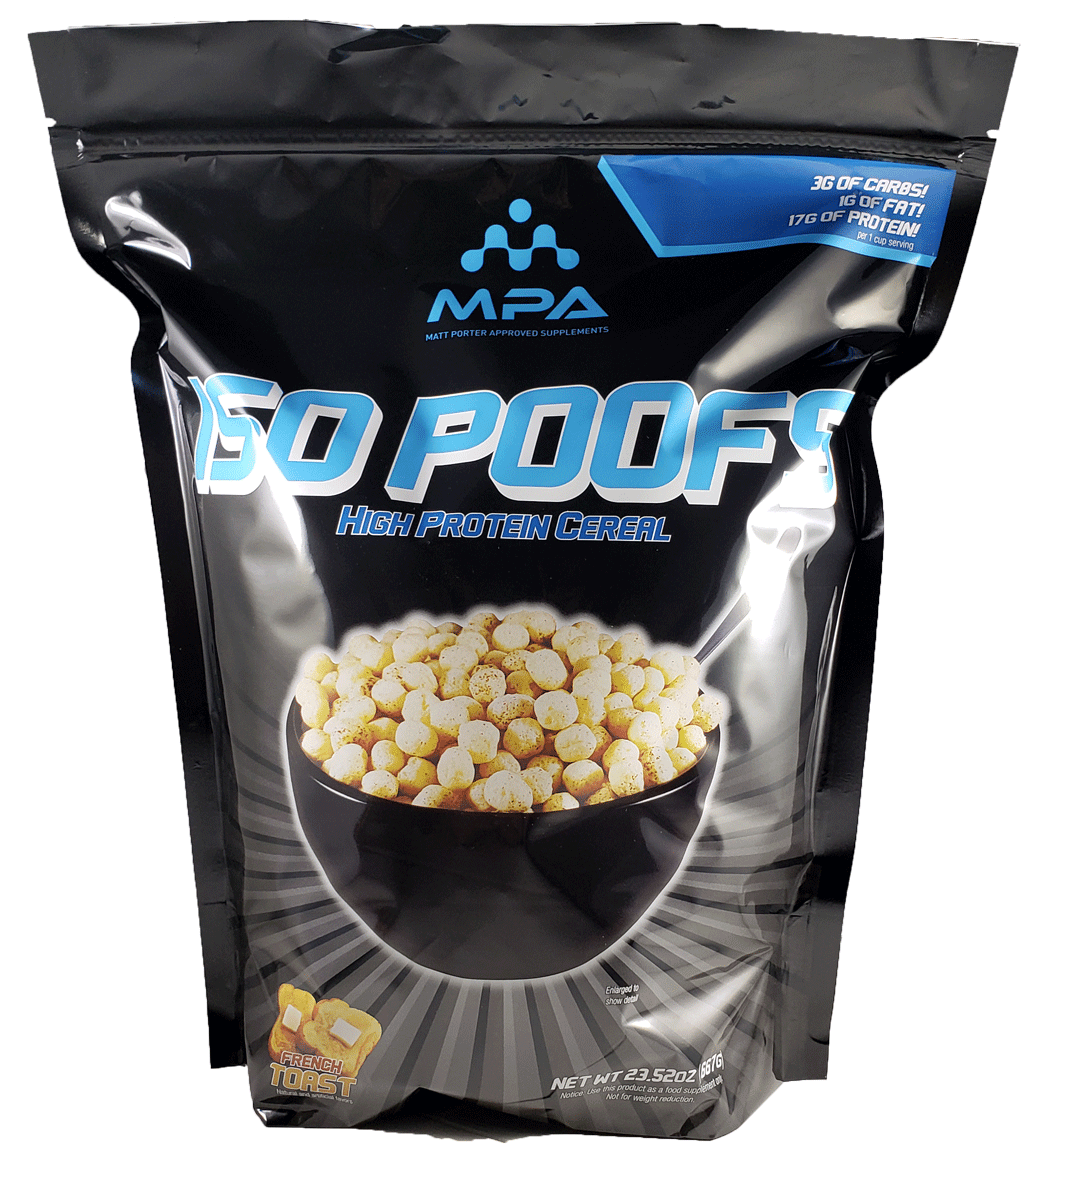 MPA ISO POOFS FRENCH TOAST FLAVOR